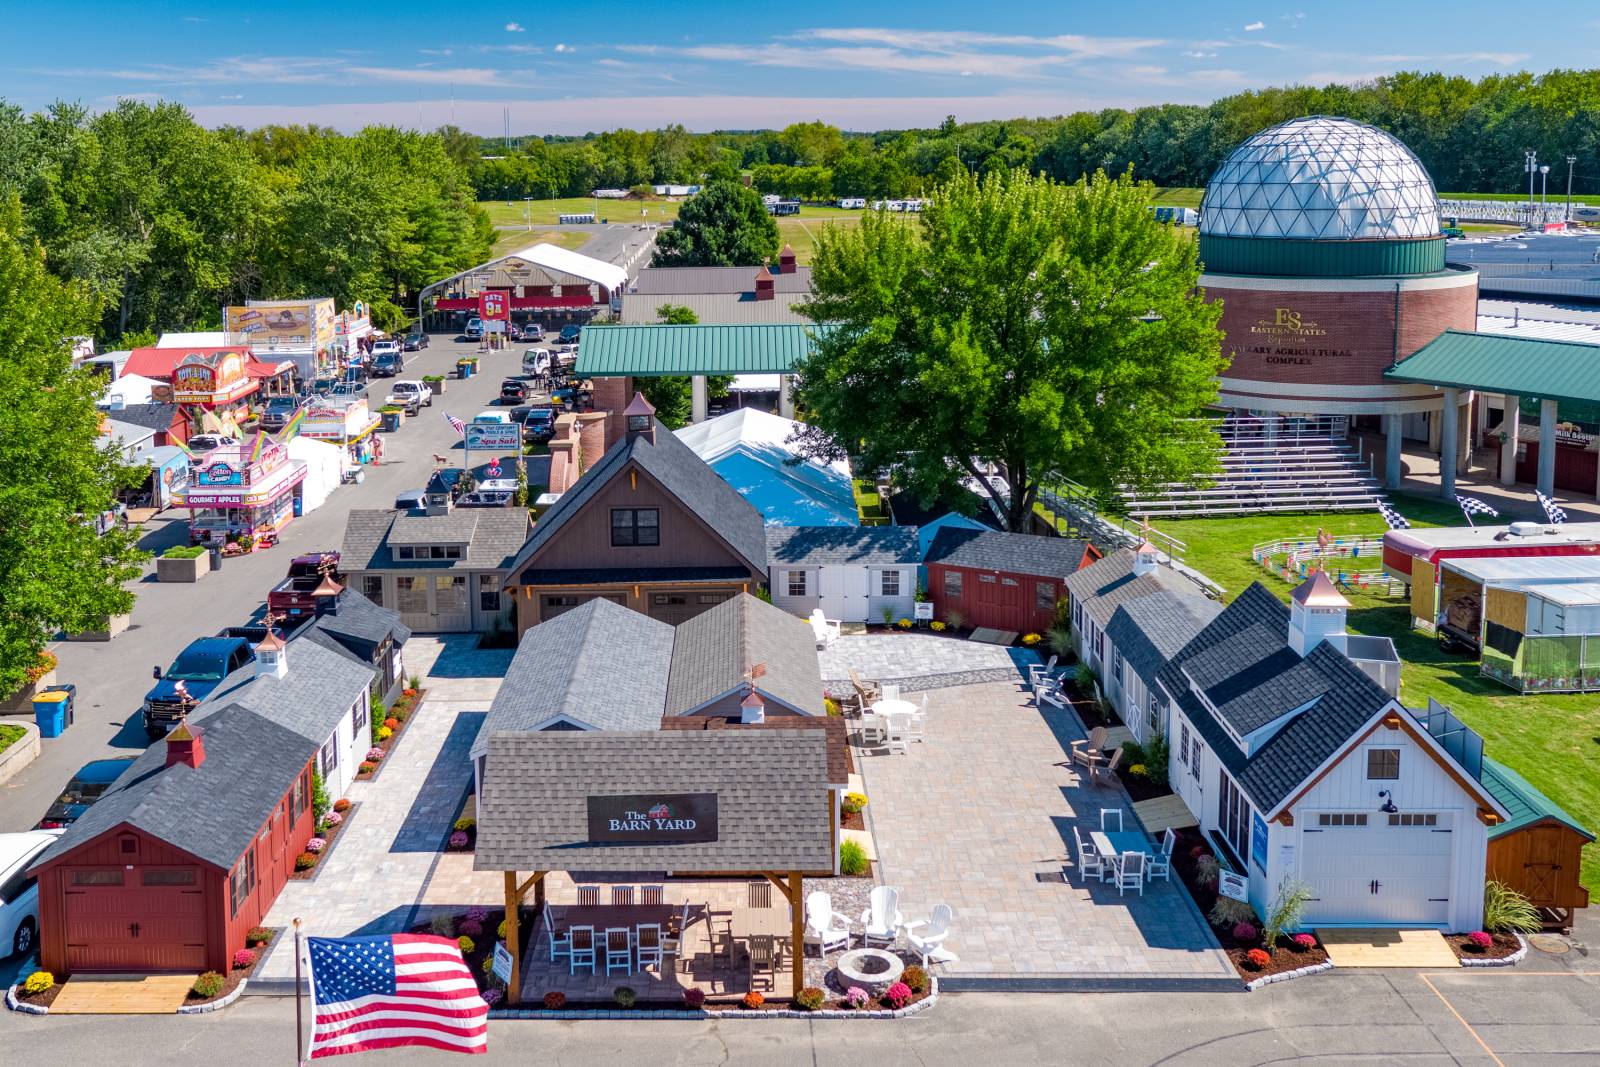 Aerial view of The Barn Yard at the Big E • Inside Gate 9